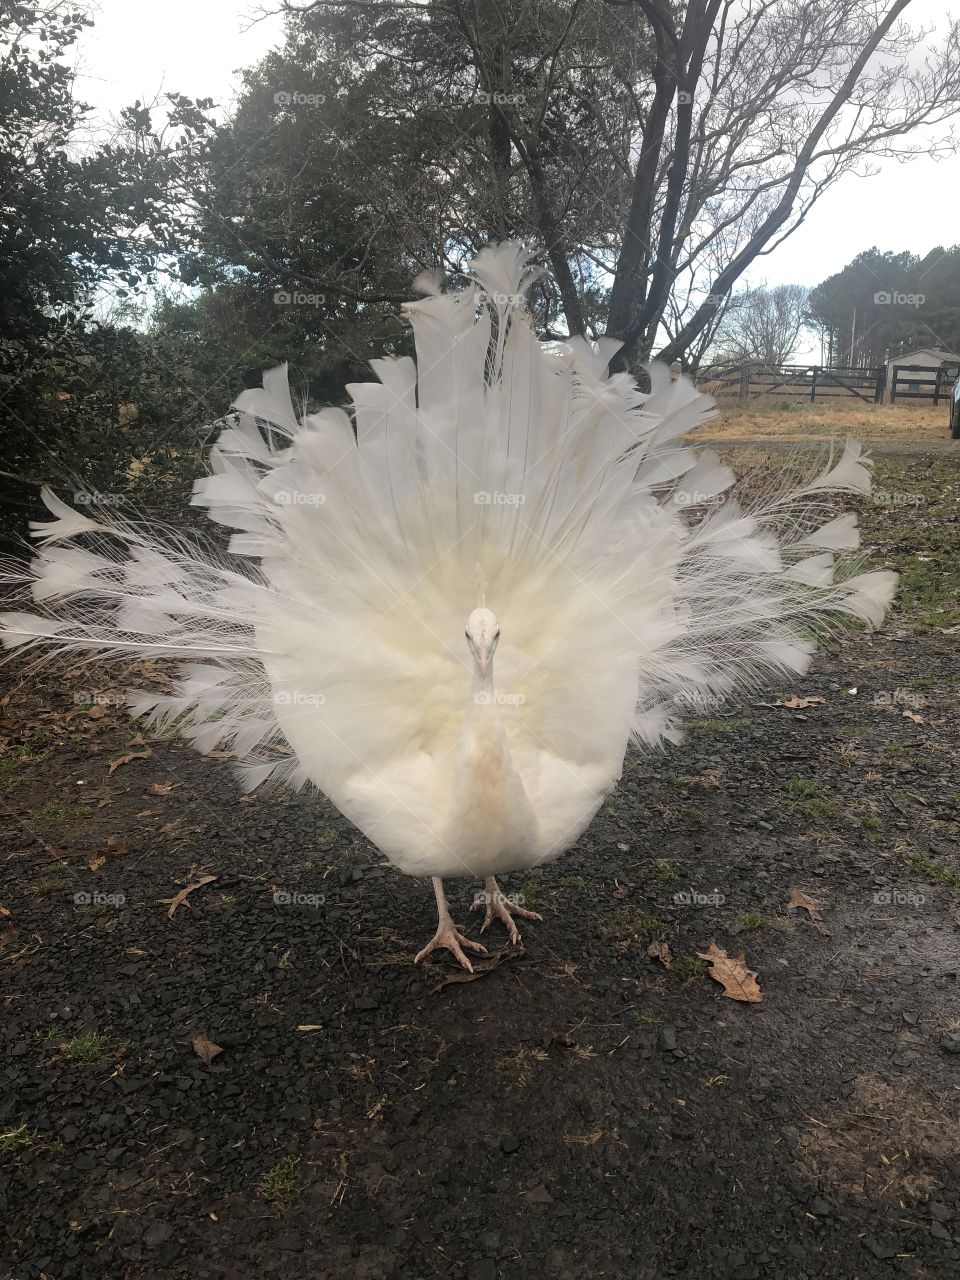 A naturally white, adolescent peacock fanning his tail feathers and challenging the photographer